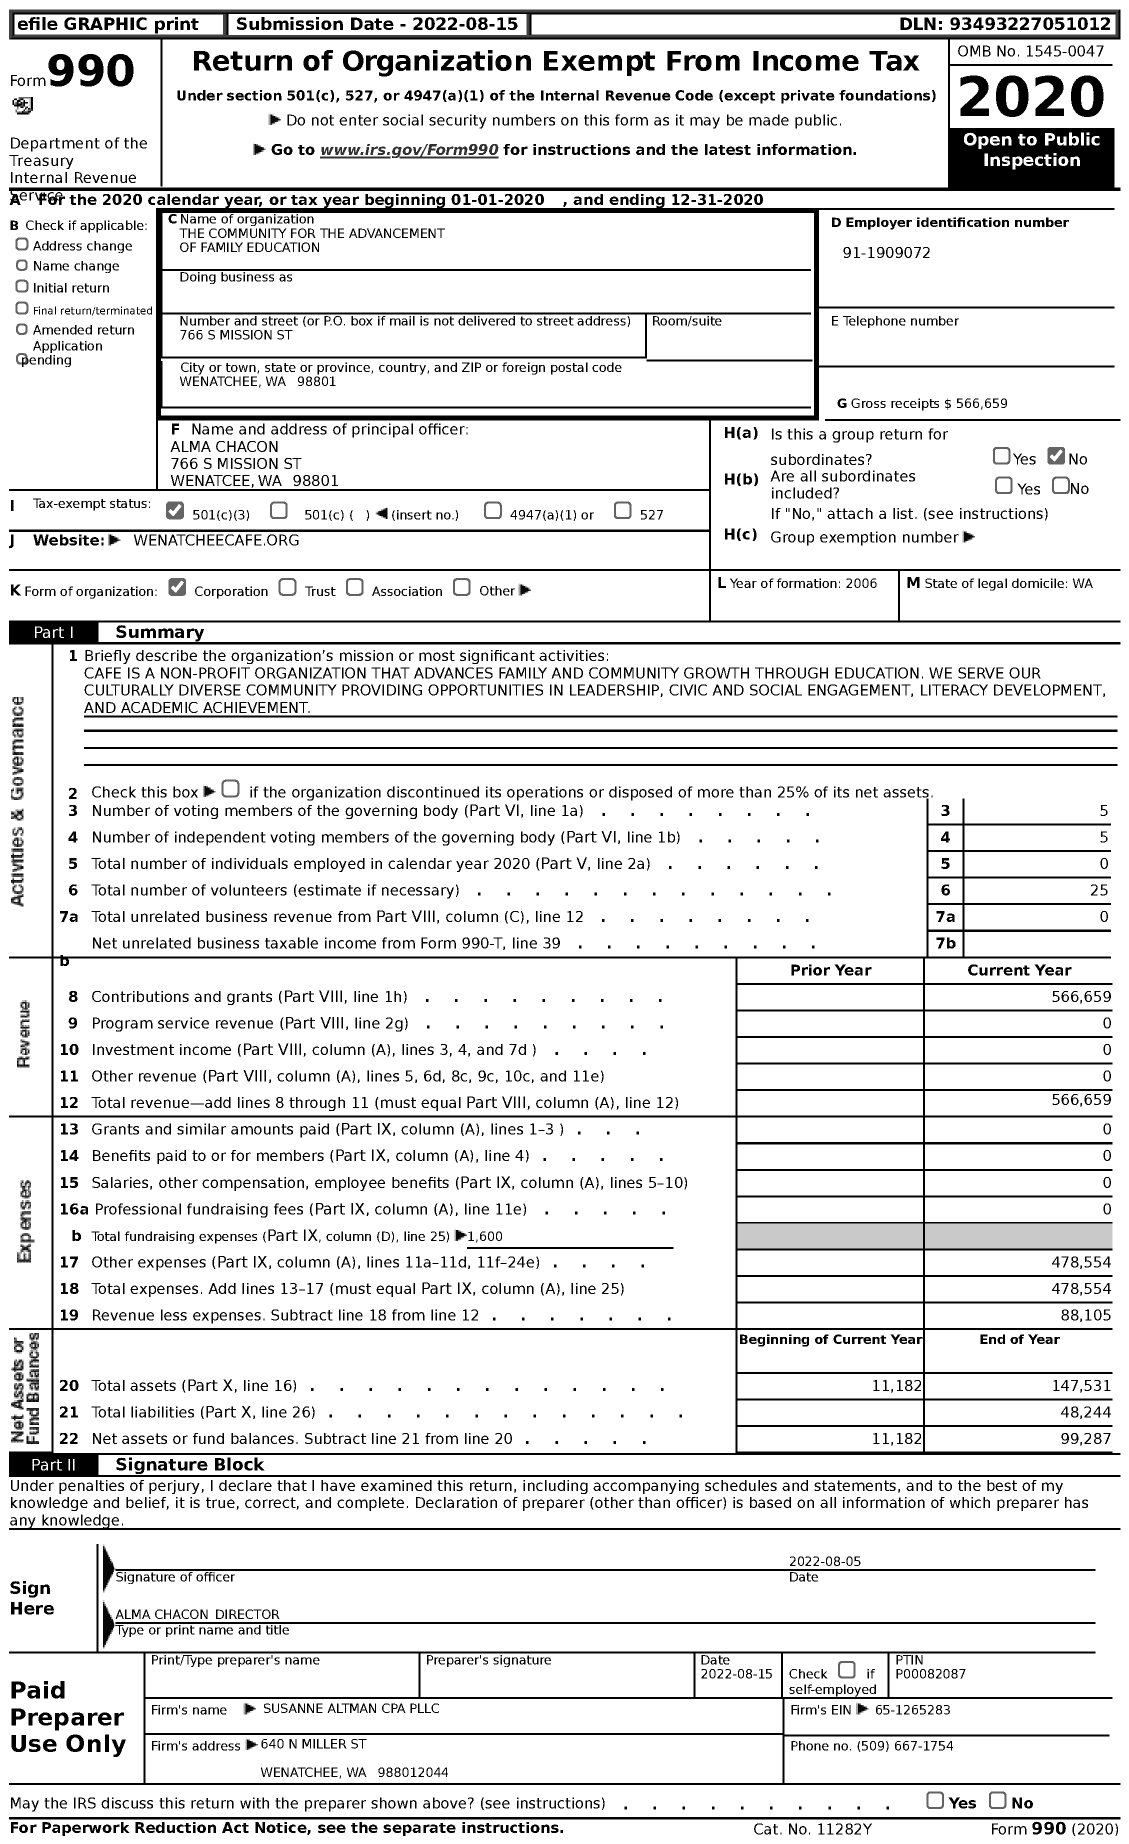 Image of first page of 2020 Form 990 for The Community for the Advancement